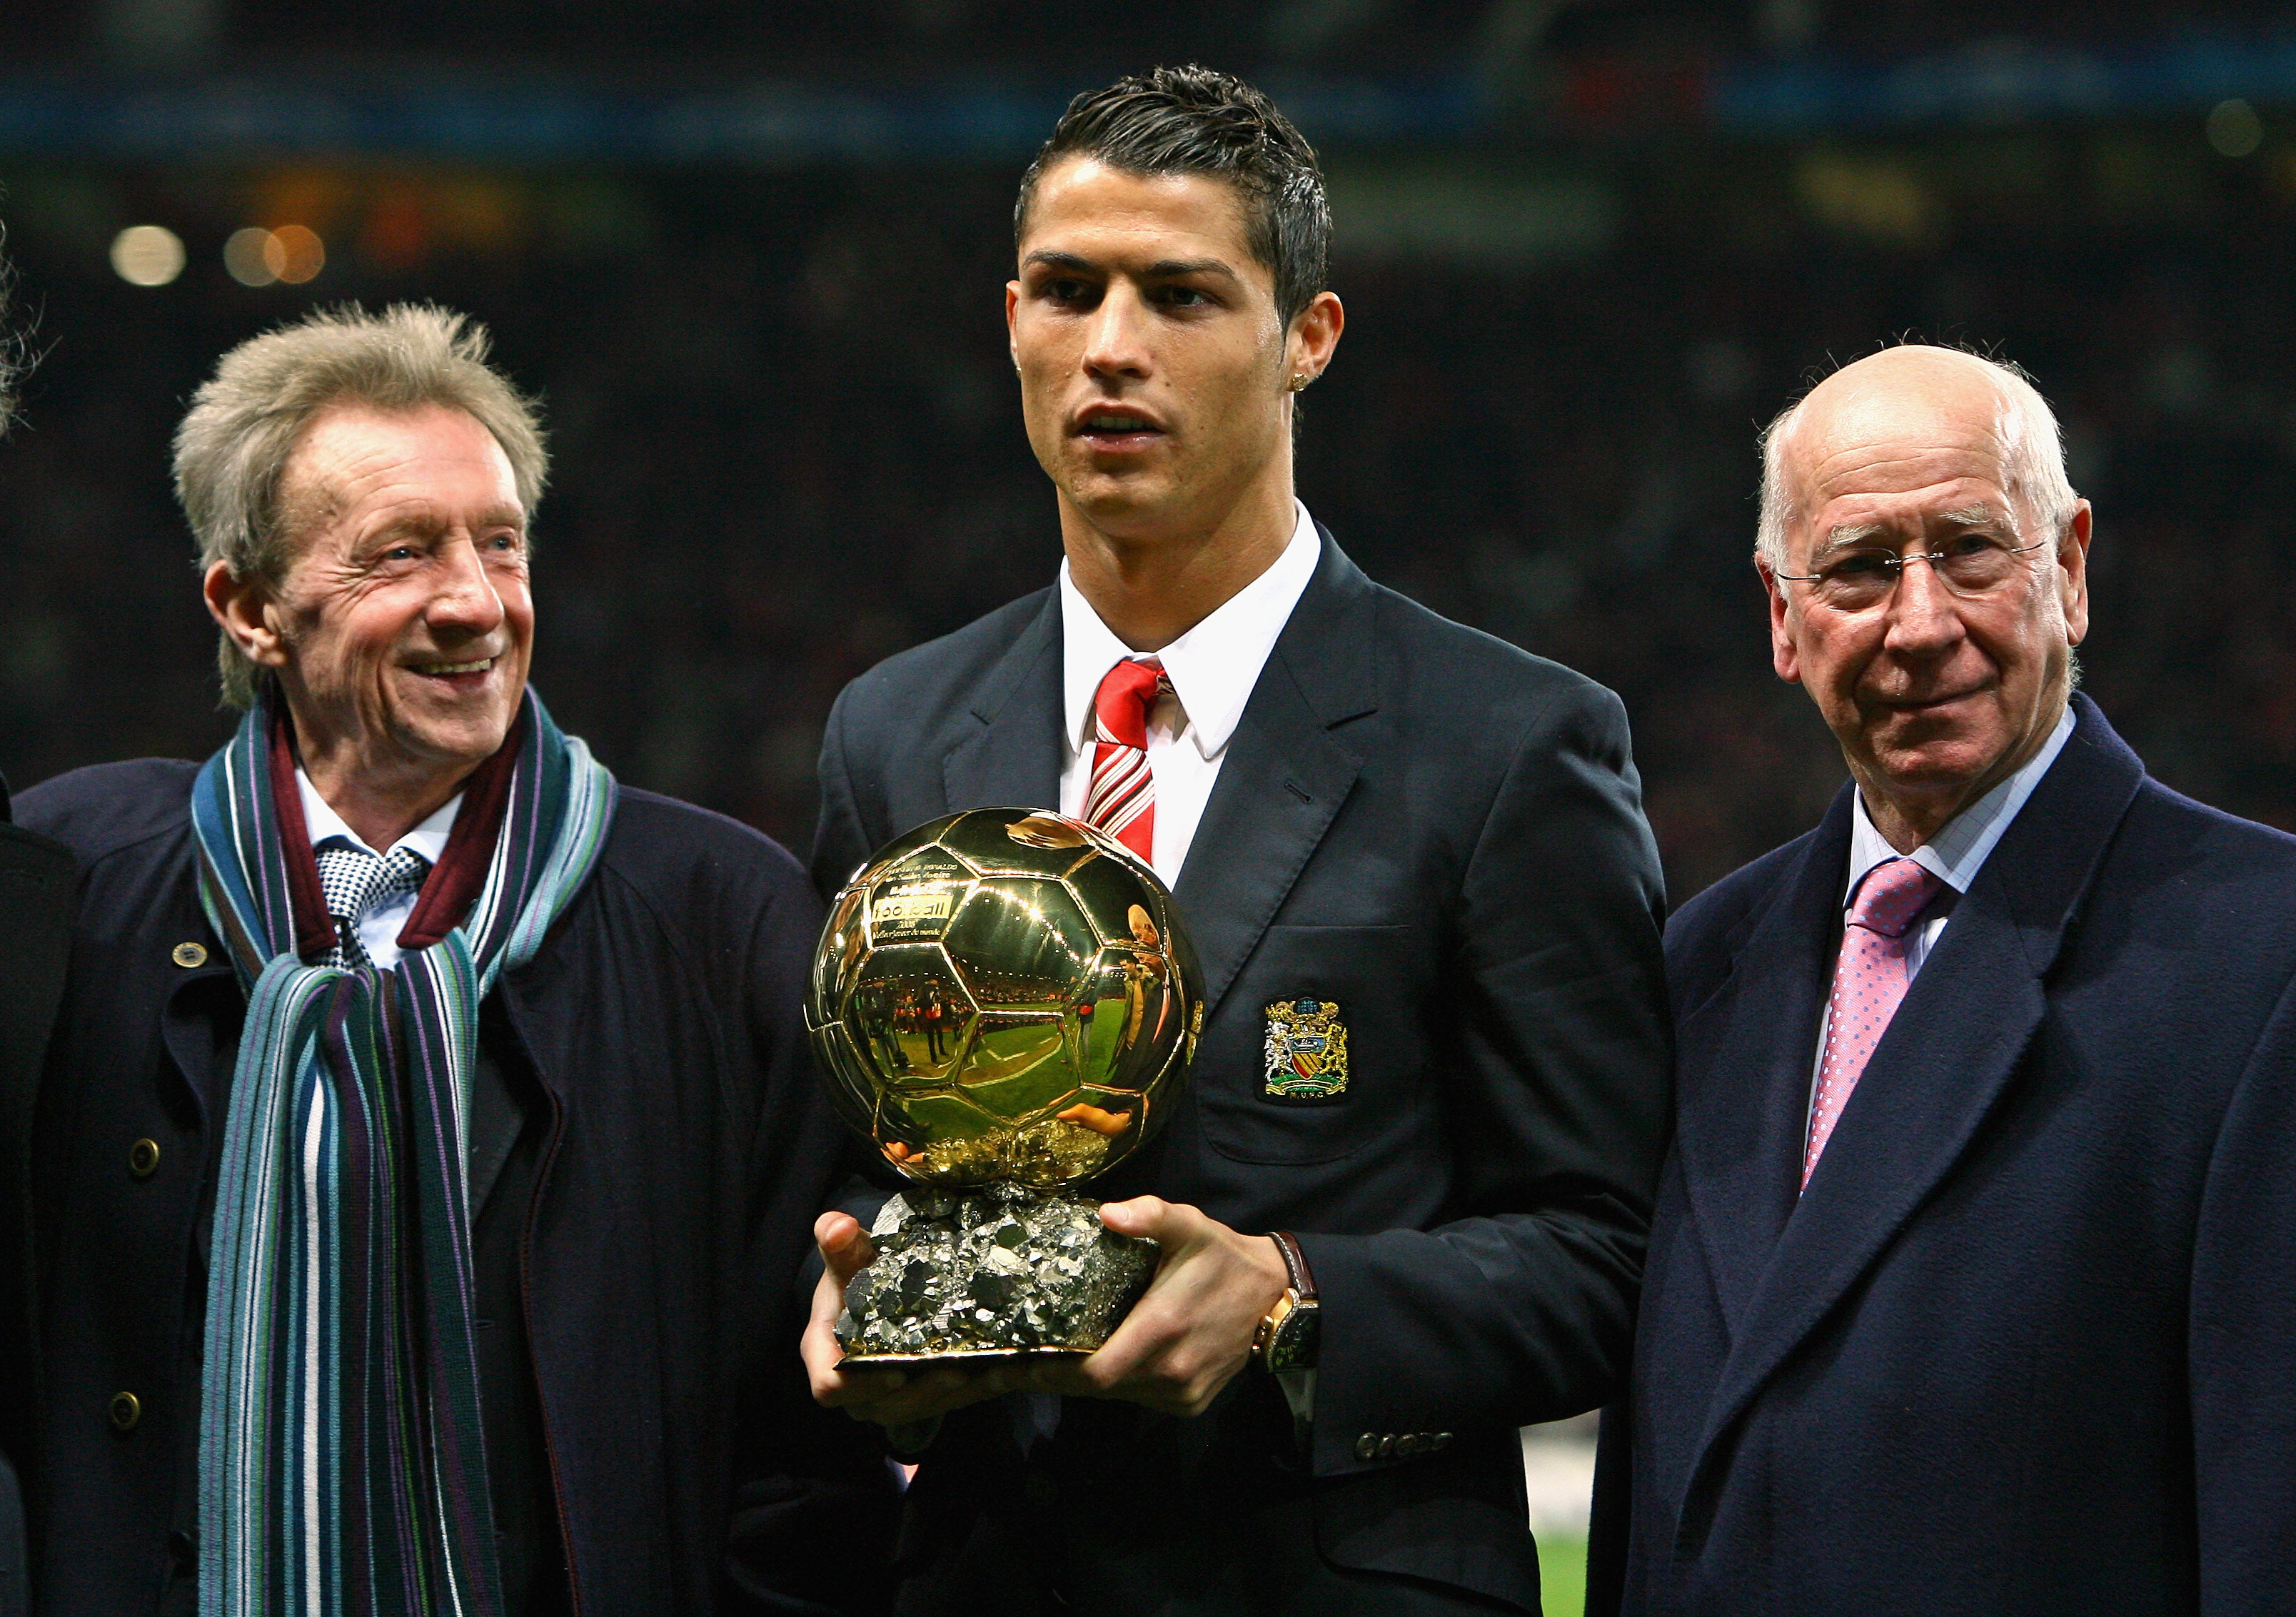 Denis Law, Cristiano Ronaldo and Bobby Charlton all won the Ballon d’Or while at Manchester United